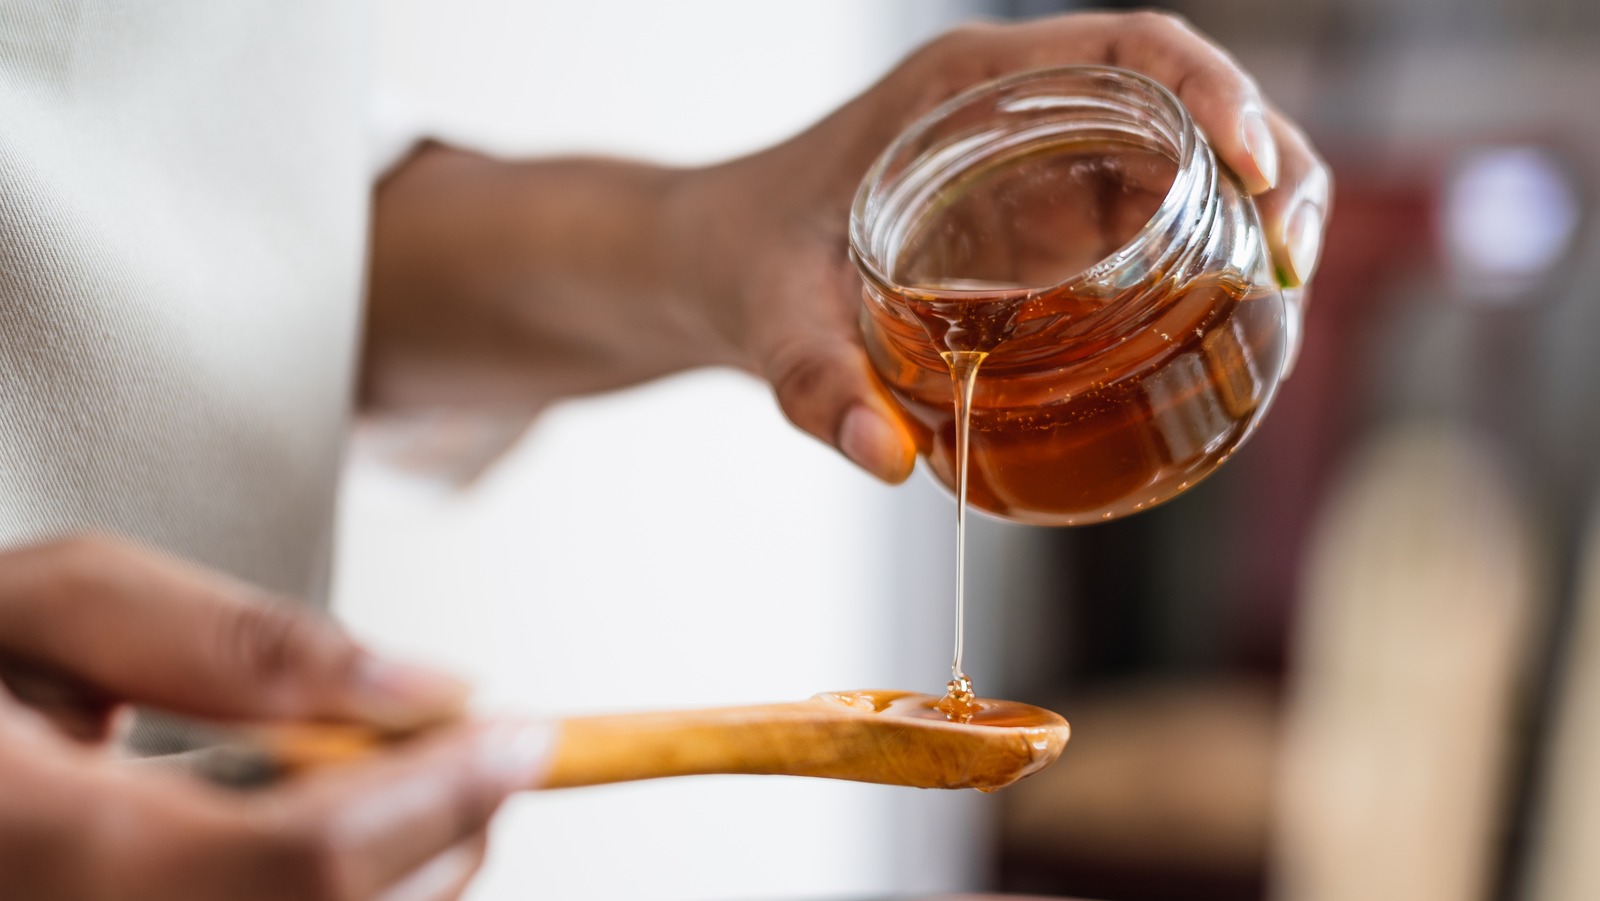 What Is Golden Syrup And What Are The Best Ways To Use It?